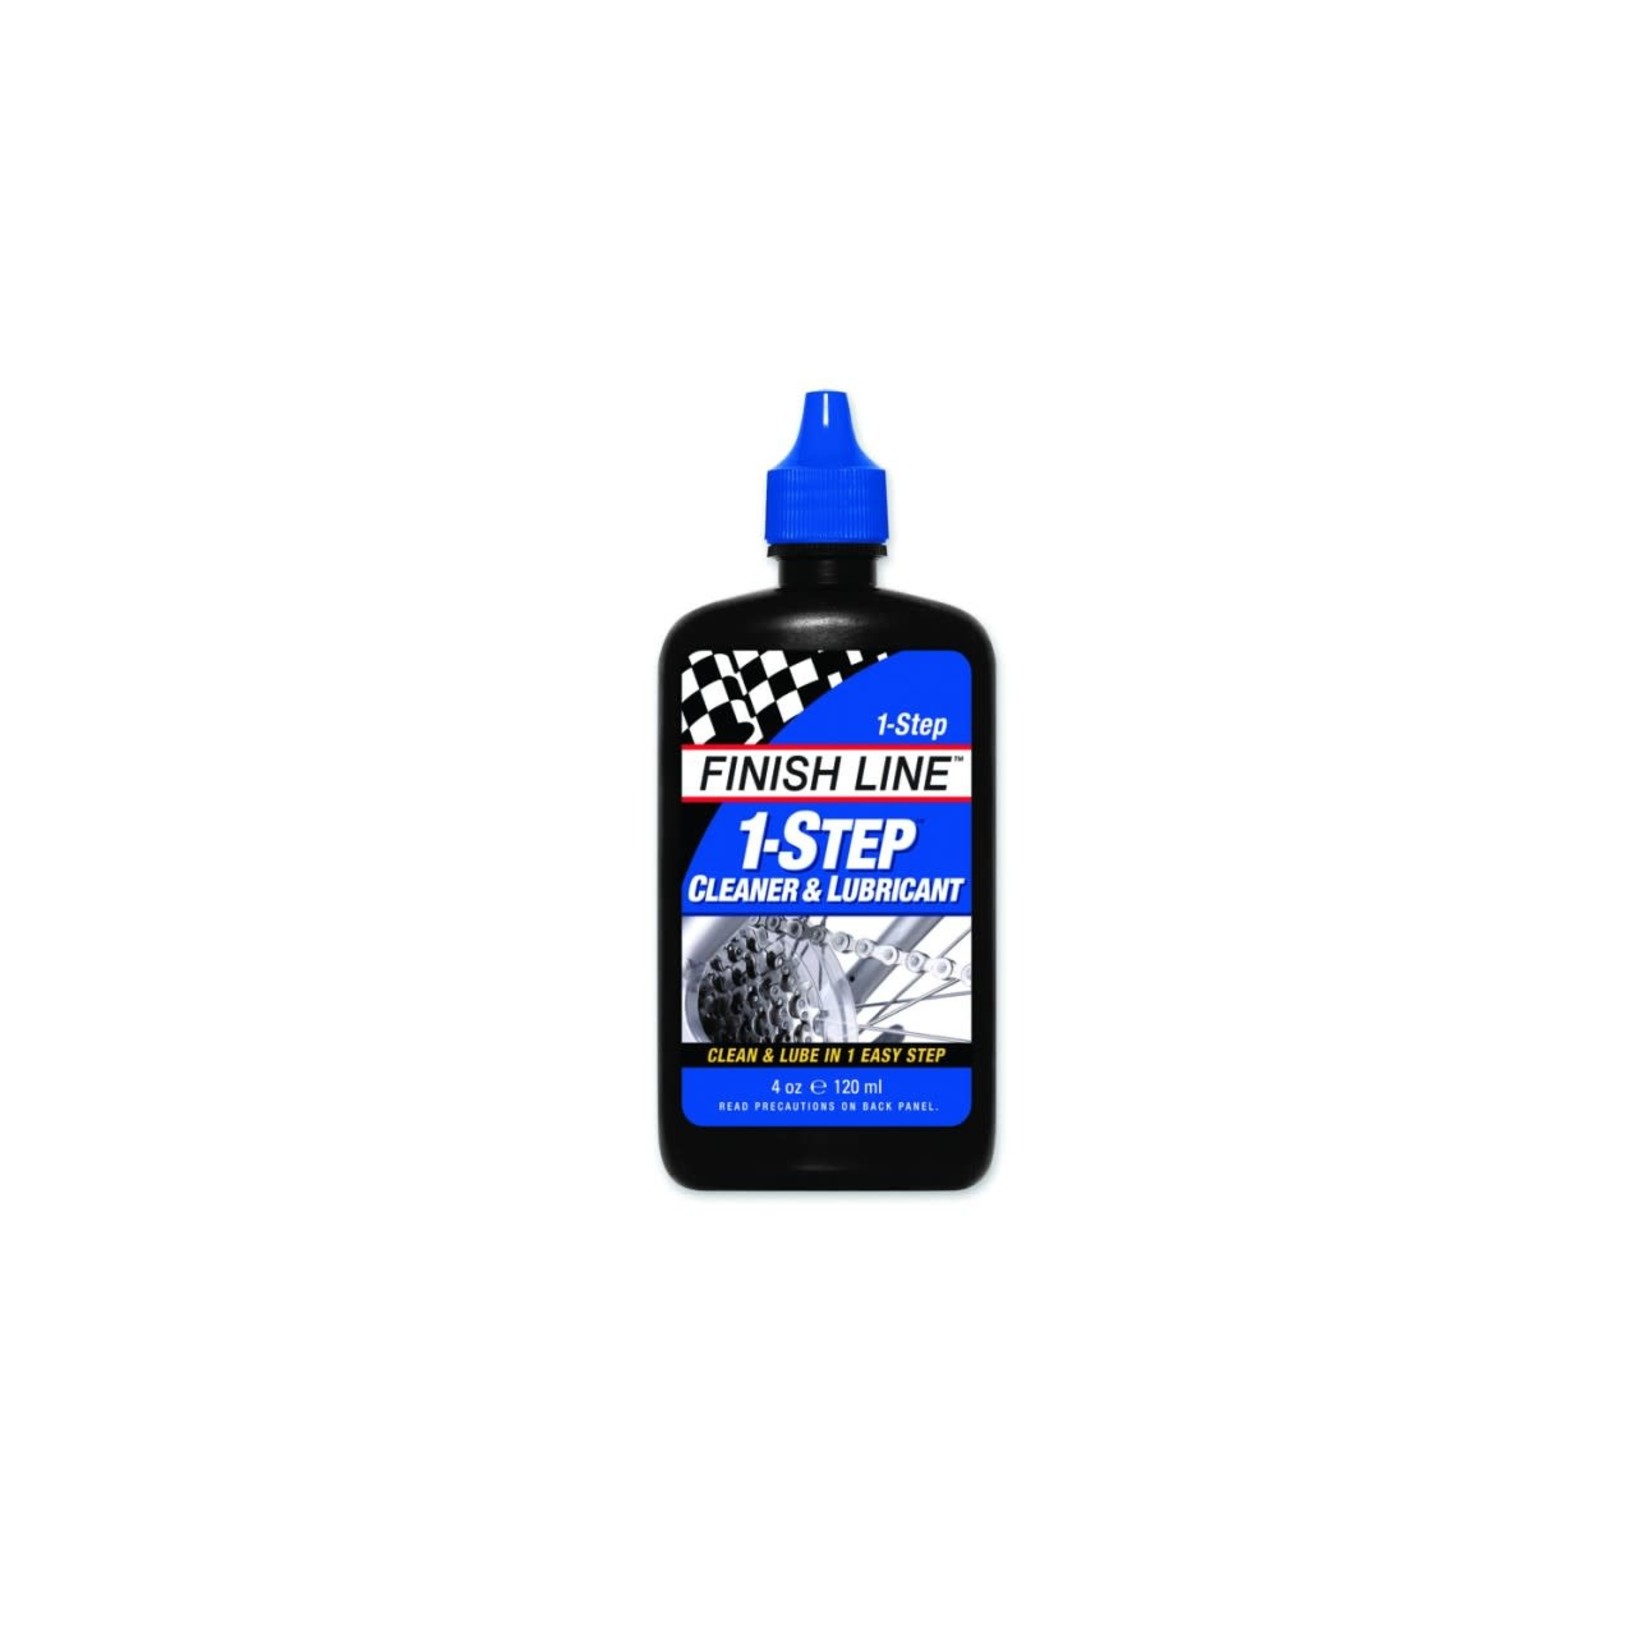 Finish Line Finish Line 1-Step Cleaner and Lube, 4oz Bottle